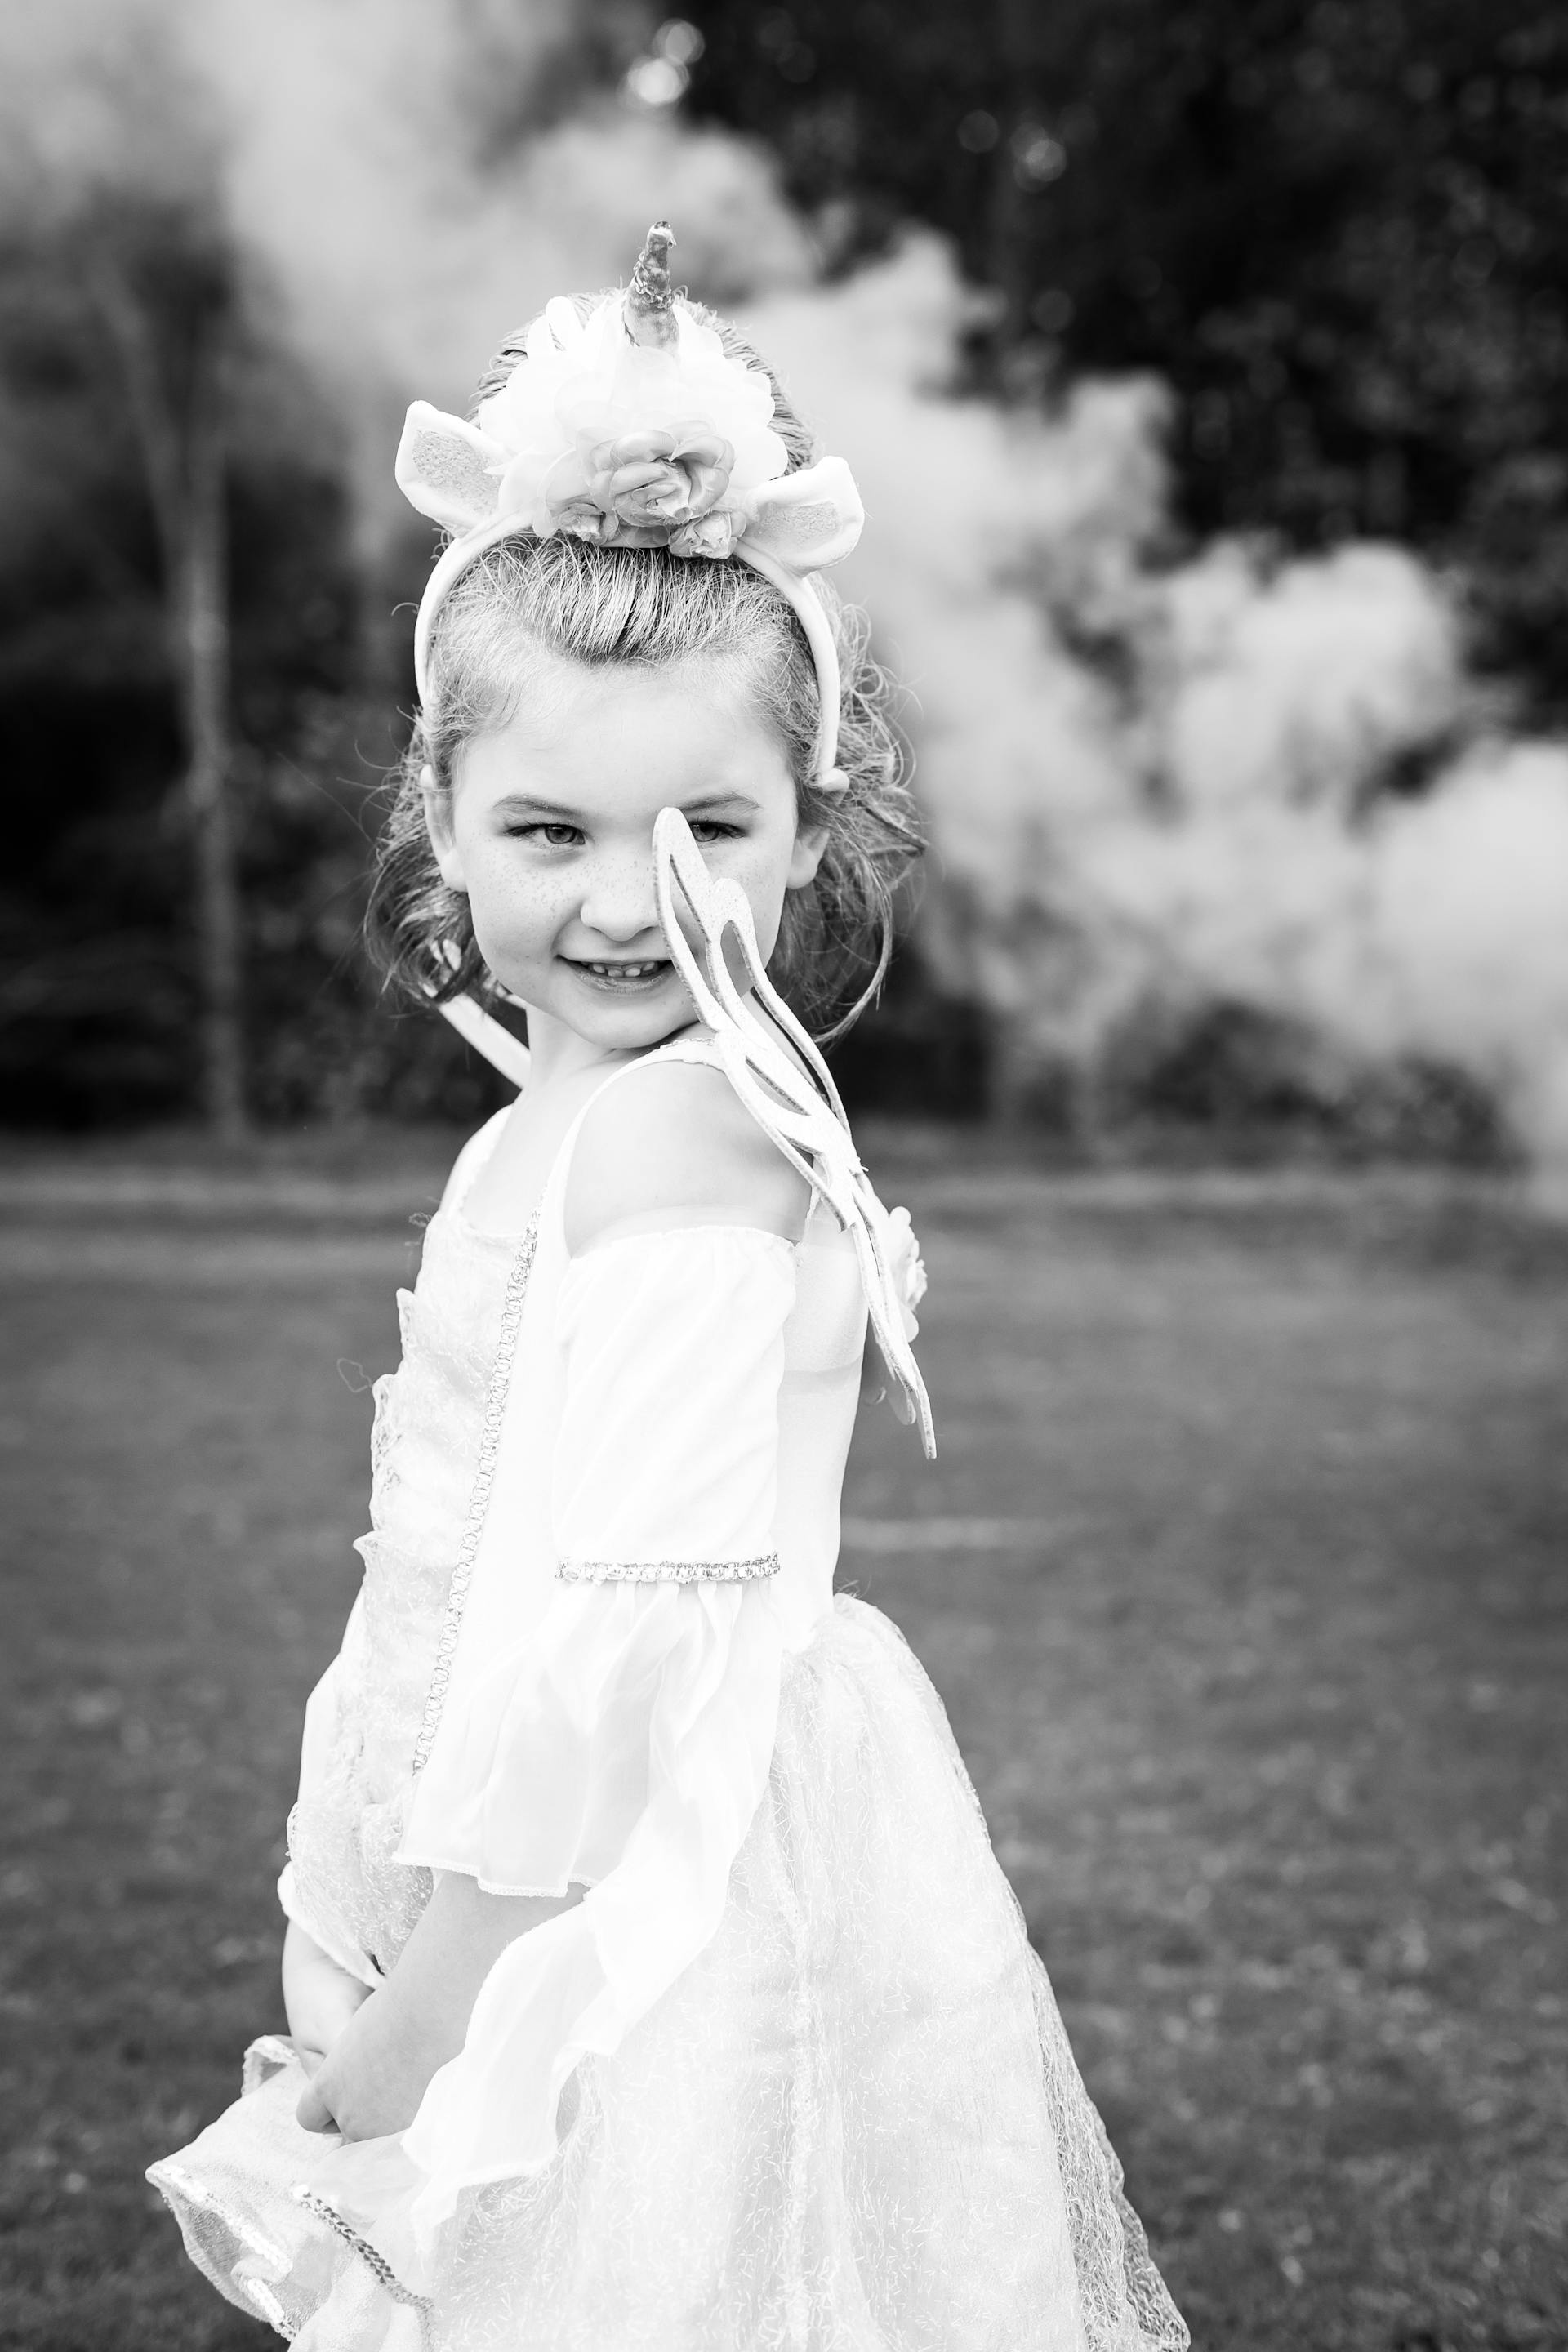 A dressed up smiling child | Source: Pexels